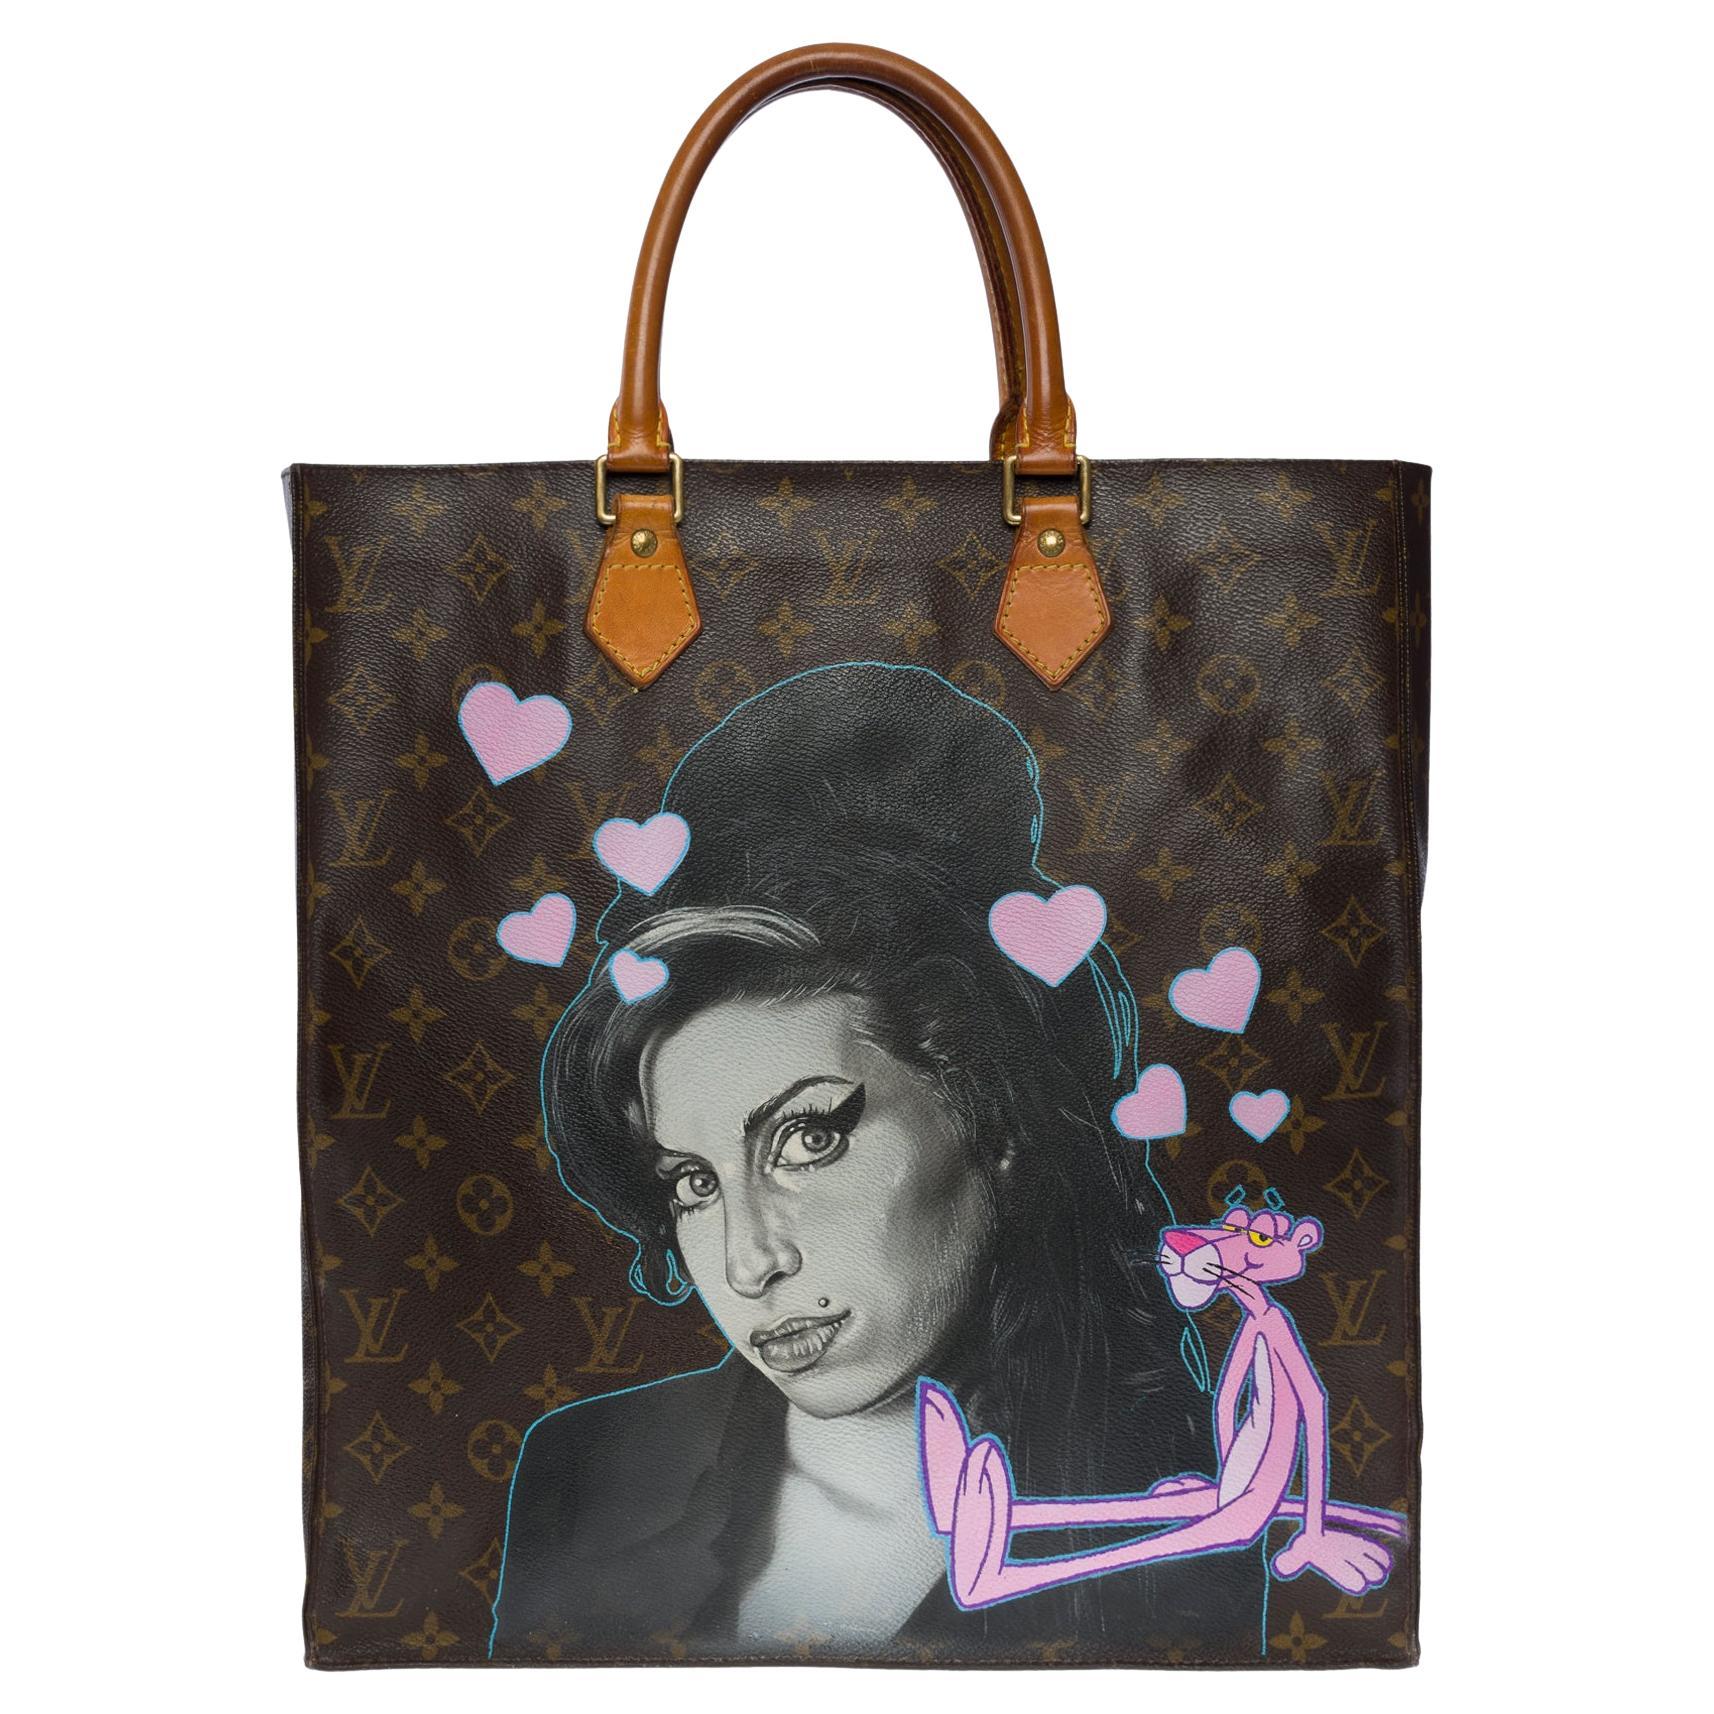 Customized Louis Vuitton Plat "Amy Winehouse & Pink Panther" Tote bag 